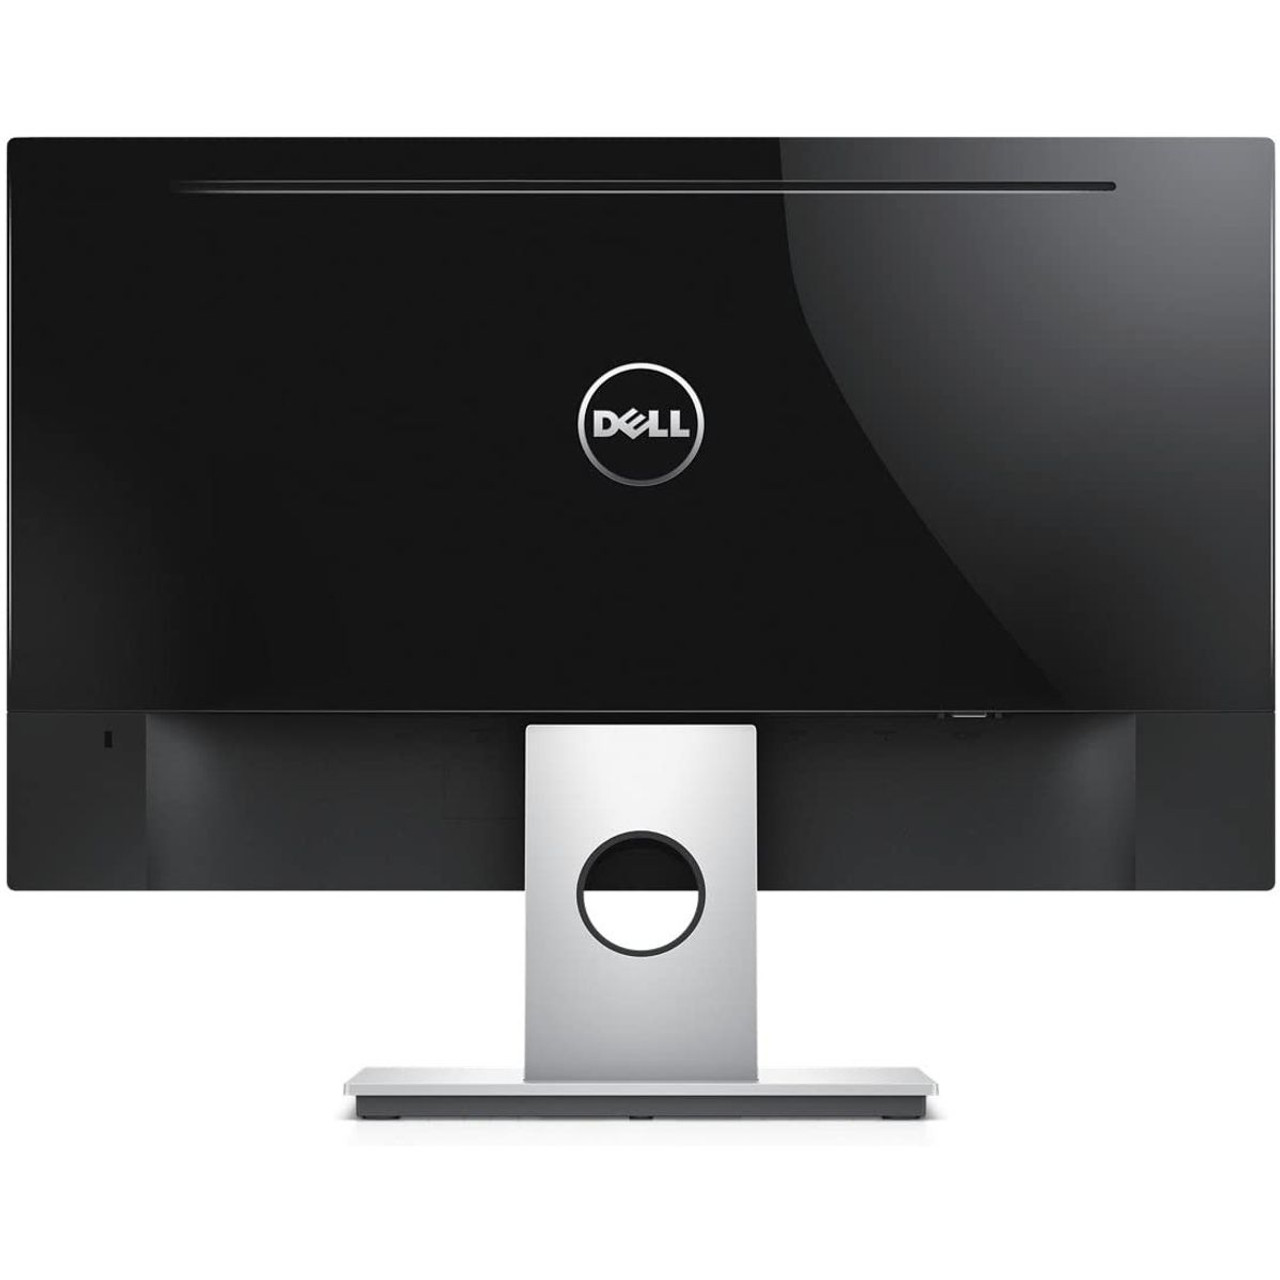 Dell 23.6" FHD 2MS 60Hz LCD Gaming Monitor product image